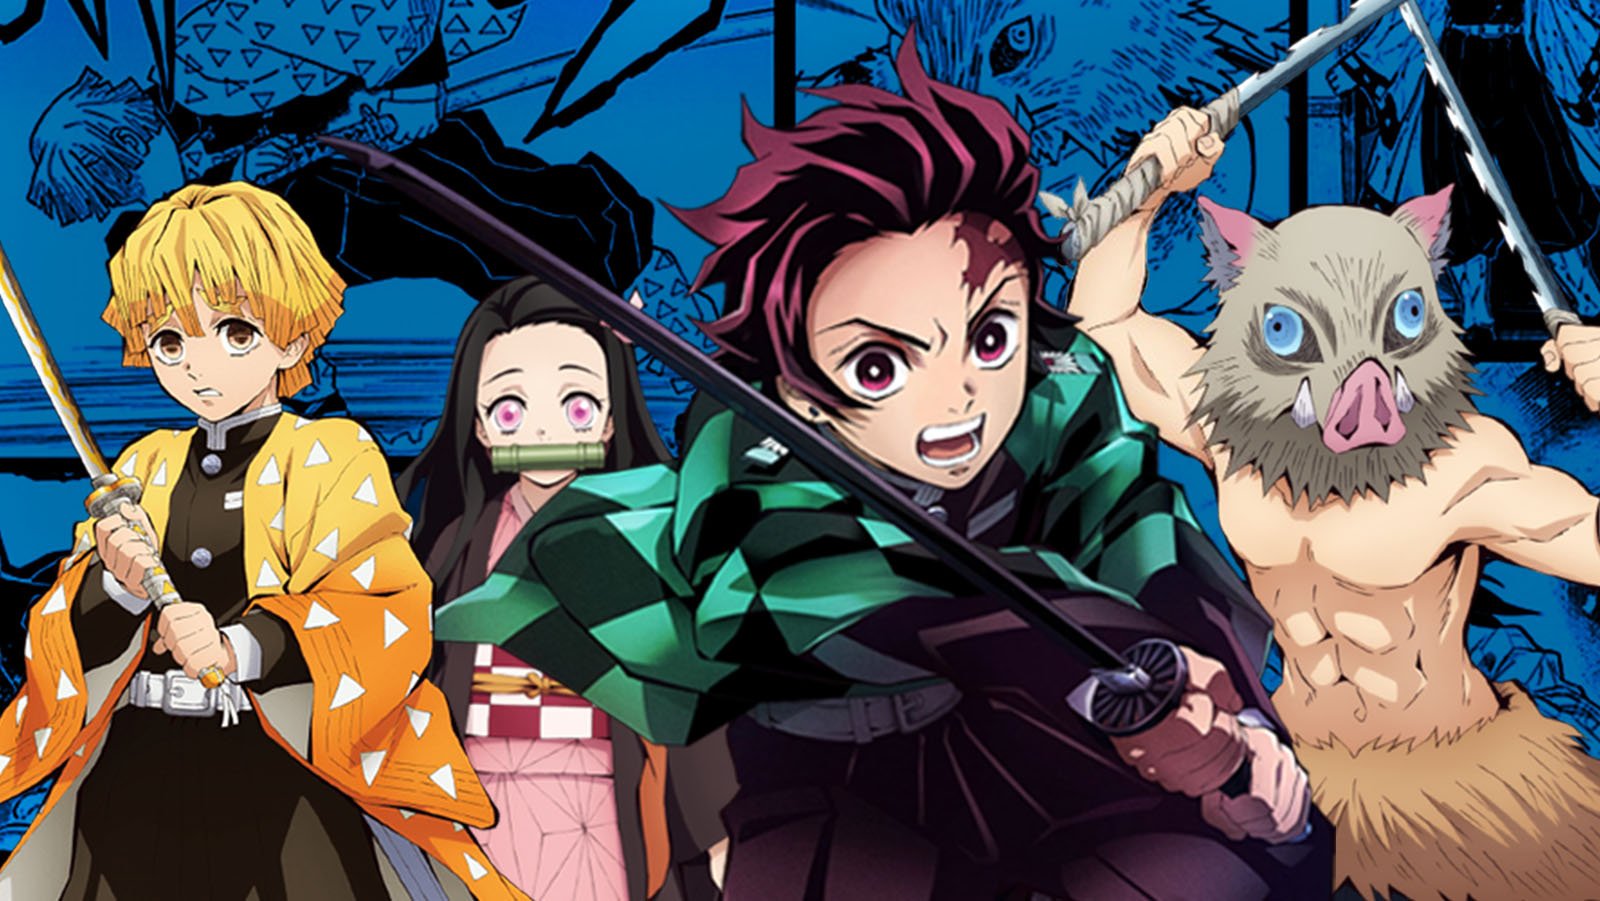 Demon Slayer' Fans Can Finally Buy Merch Without Paying Import Costs